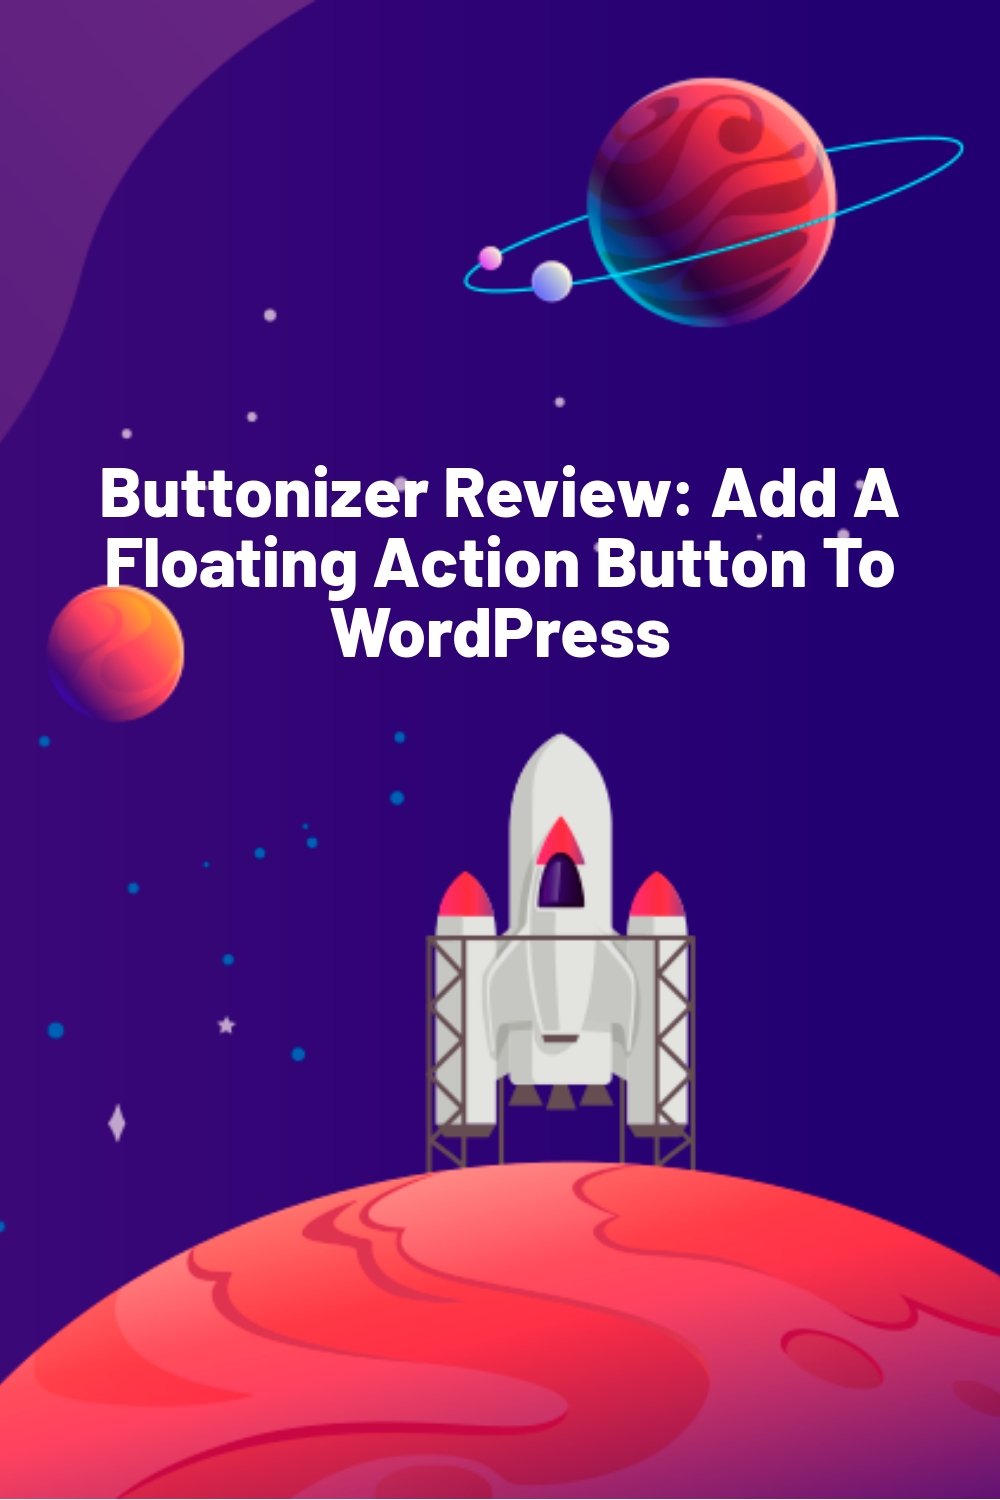 Buttonizer Review: Add A Floating Action Button To WordPress